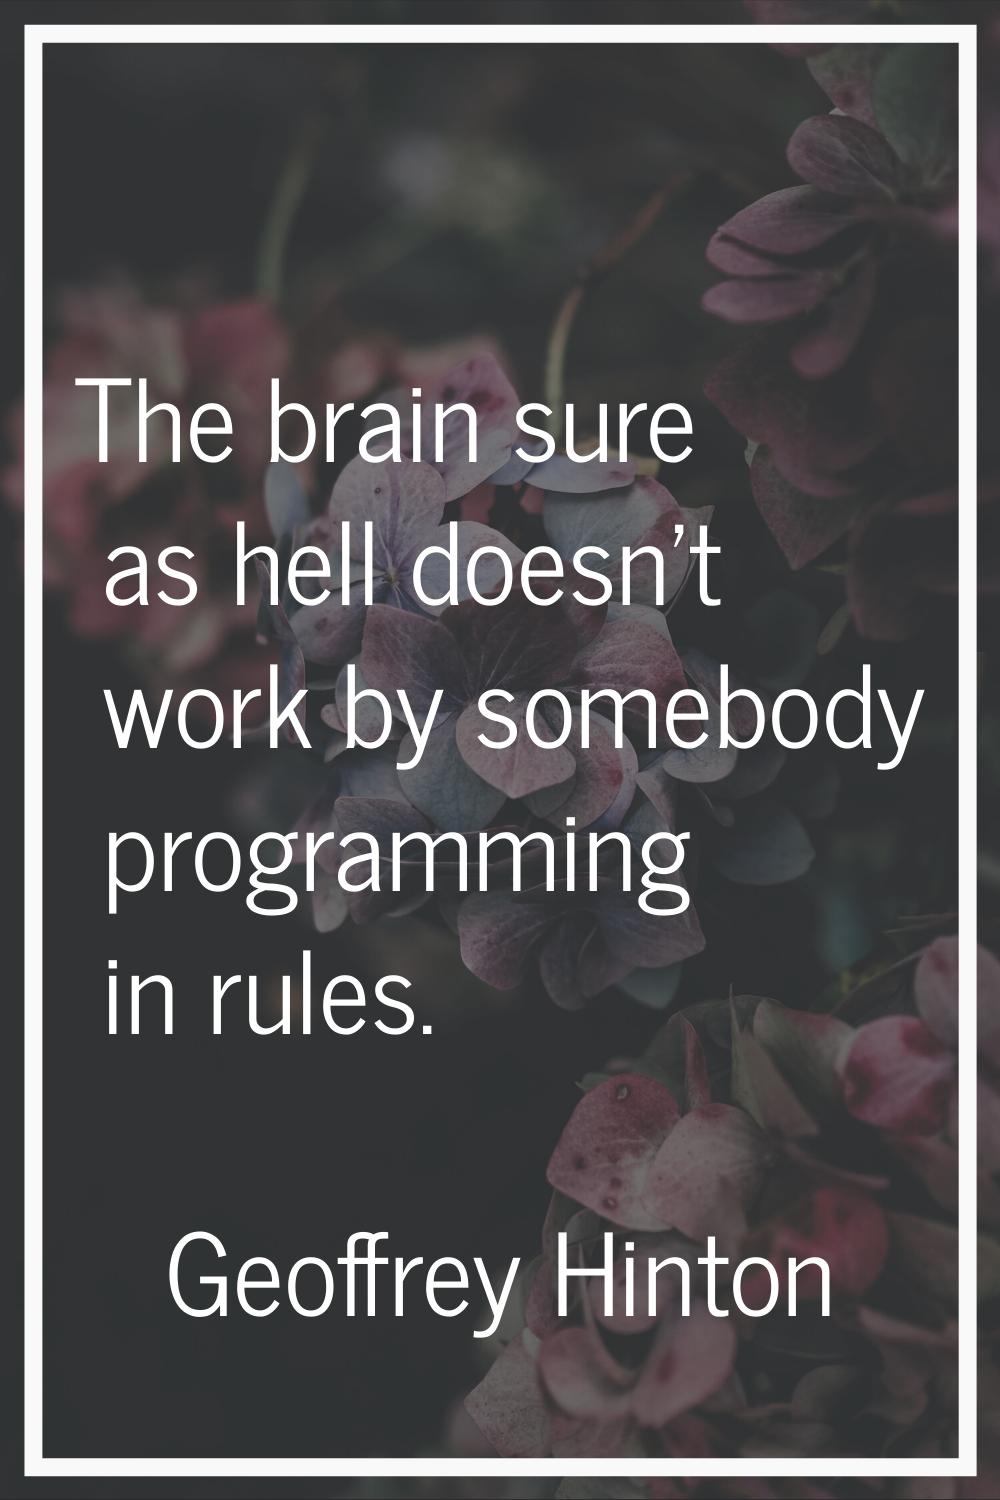 The brain sure as hell doesn't work by somebody programming in rules.